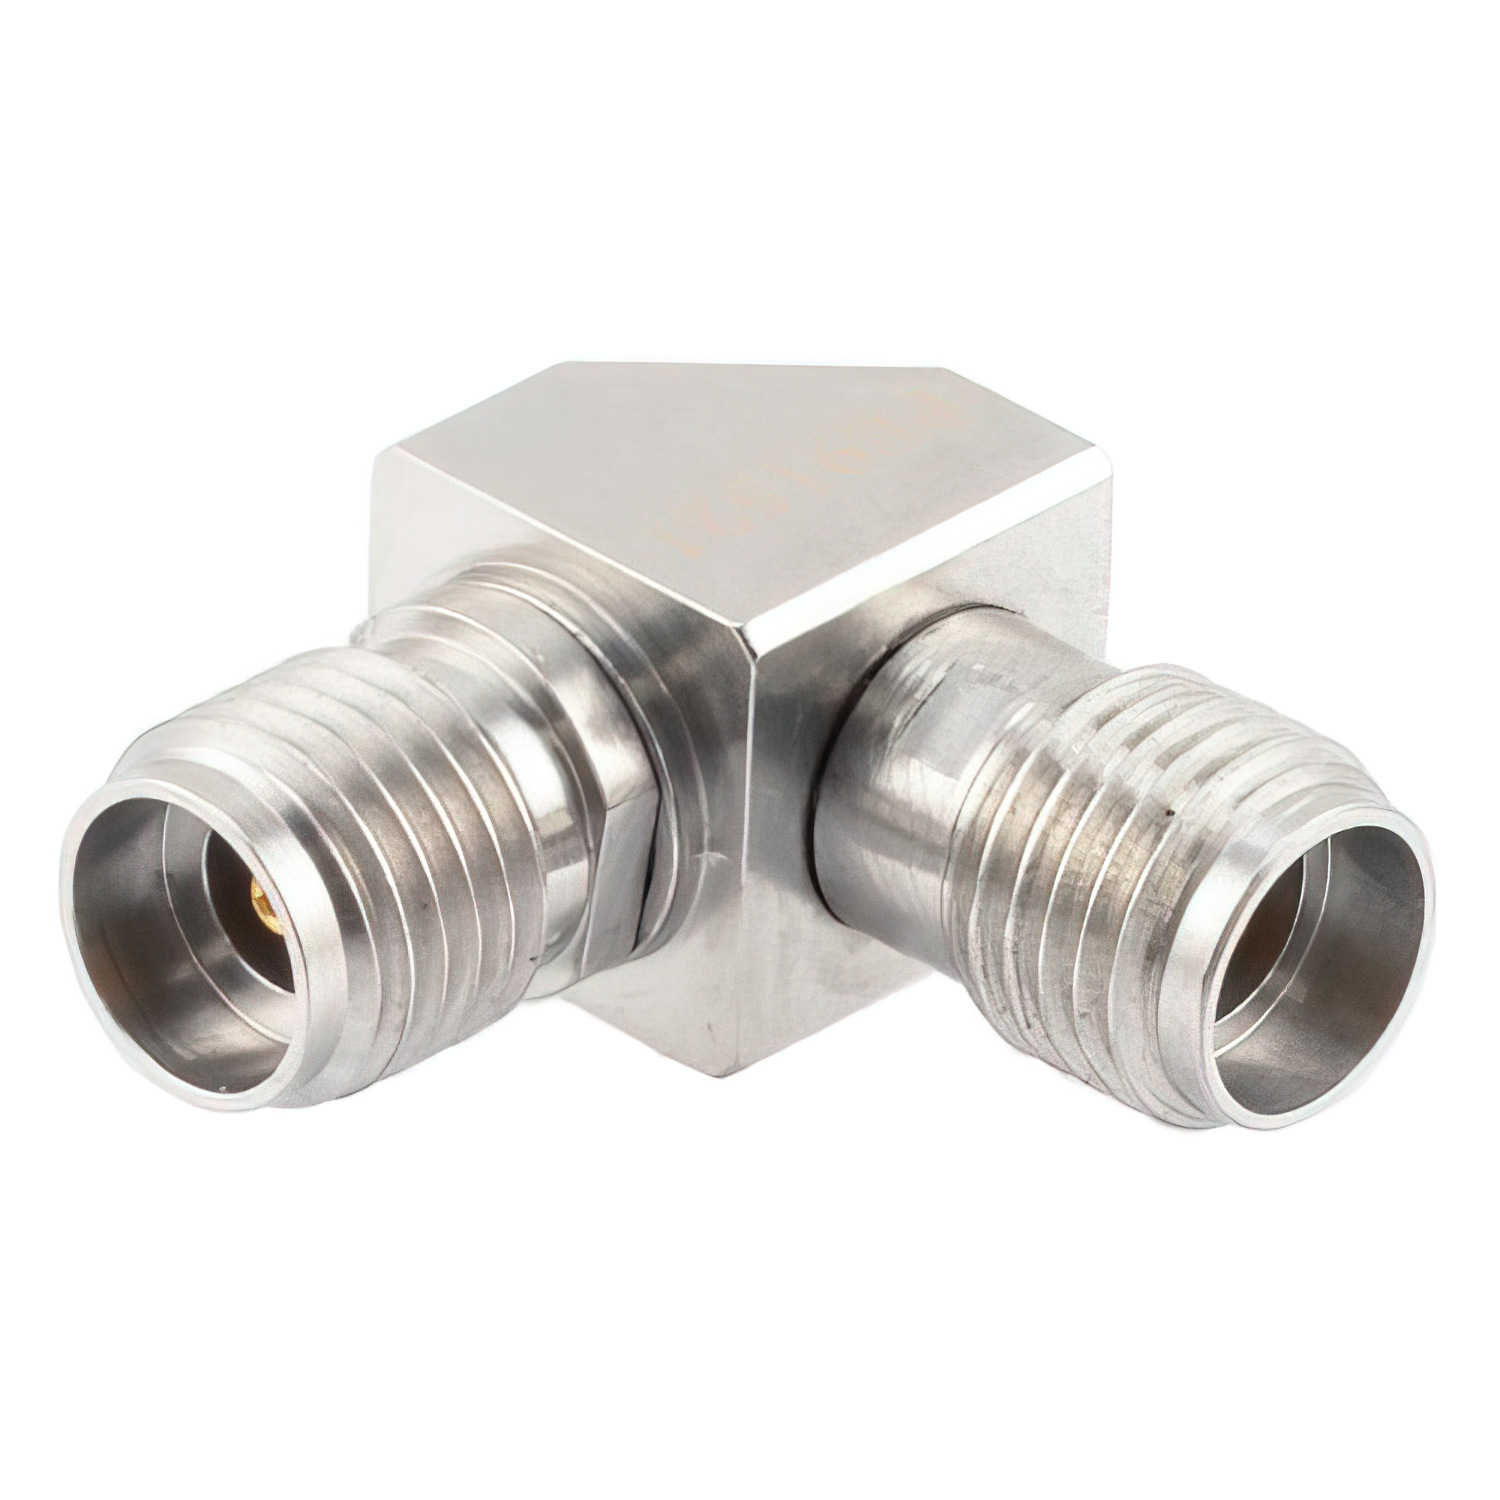 2.92mm Female to 3.5mm Female Miter Right Angle Adapter1